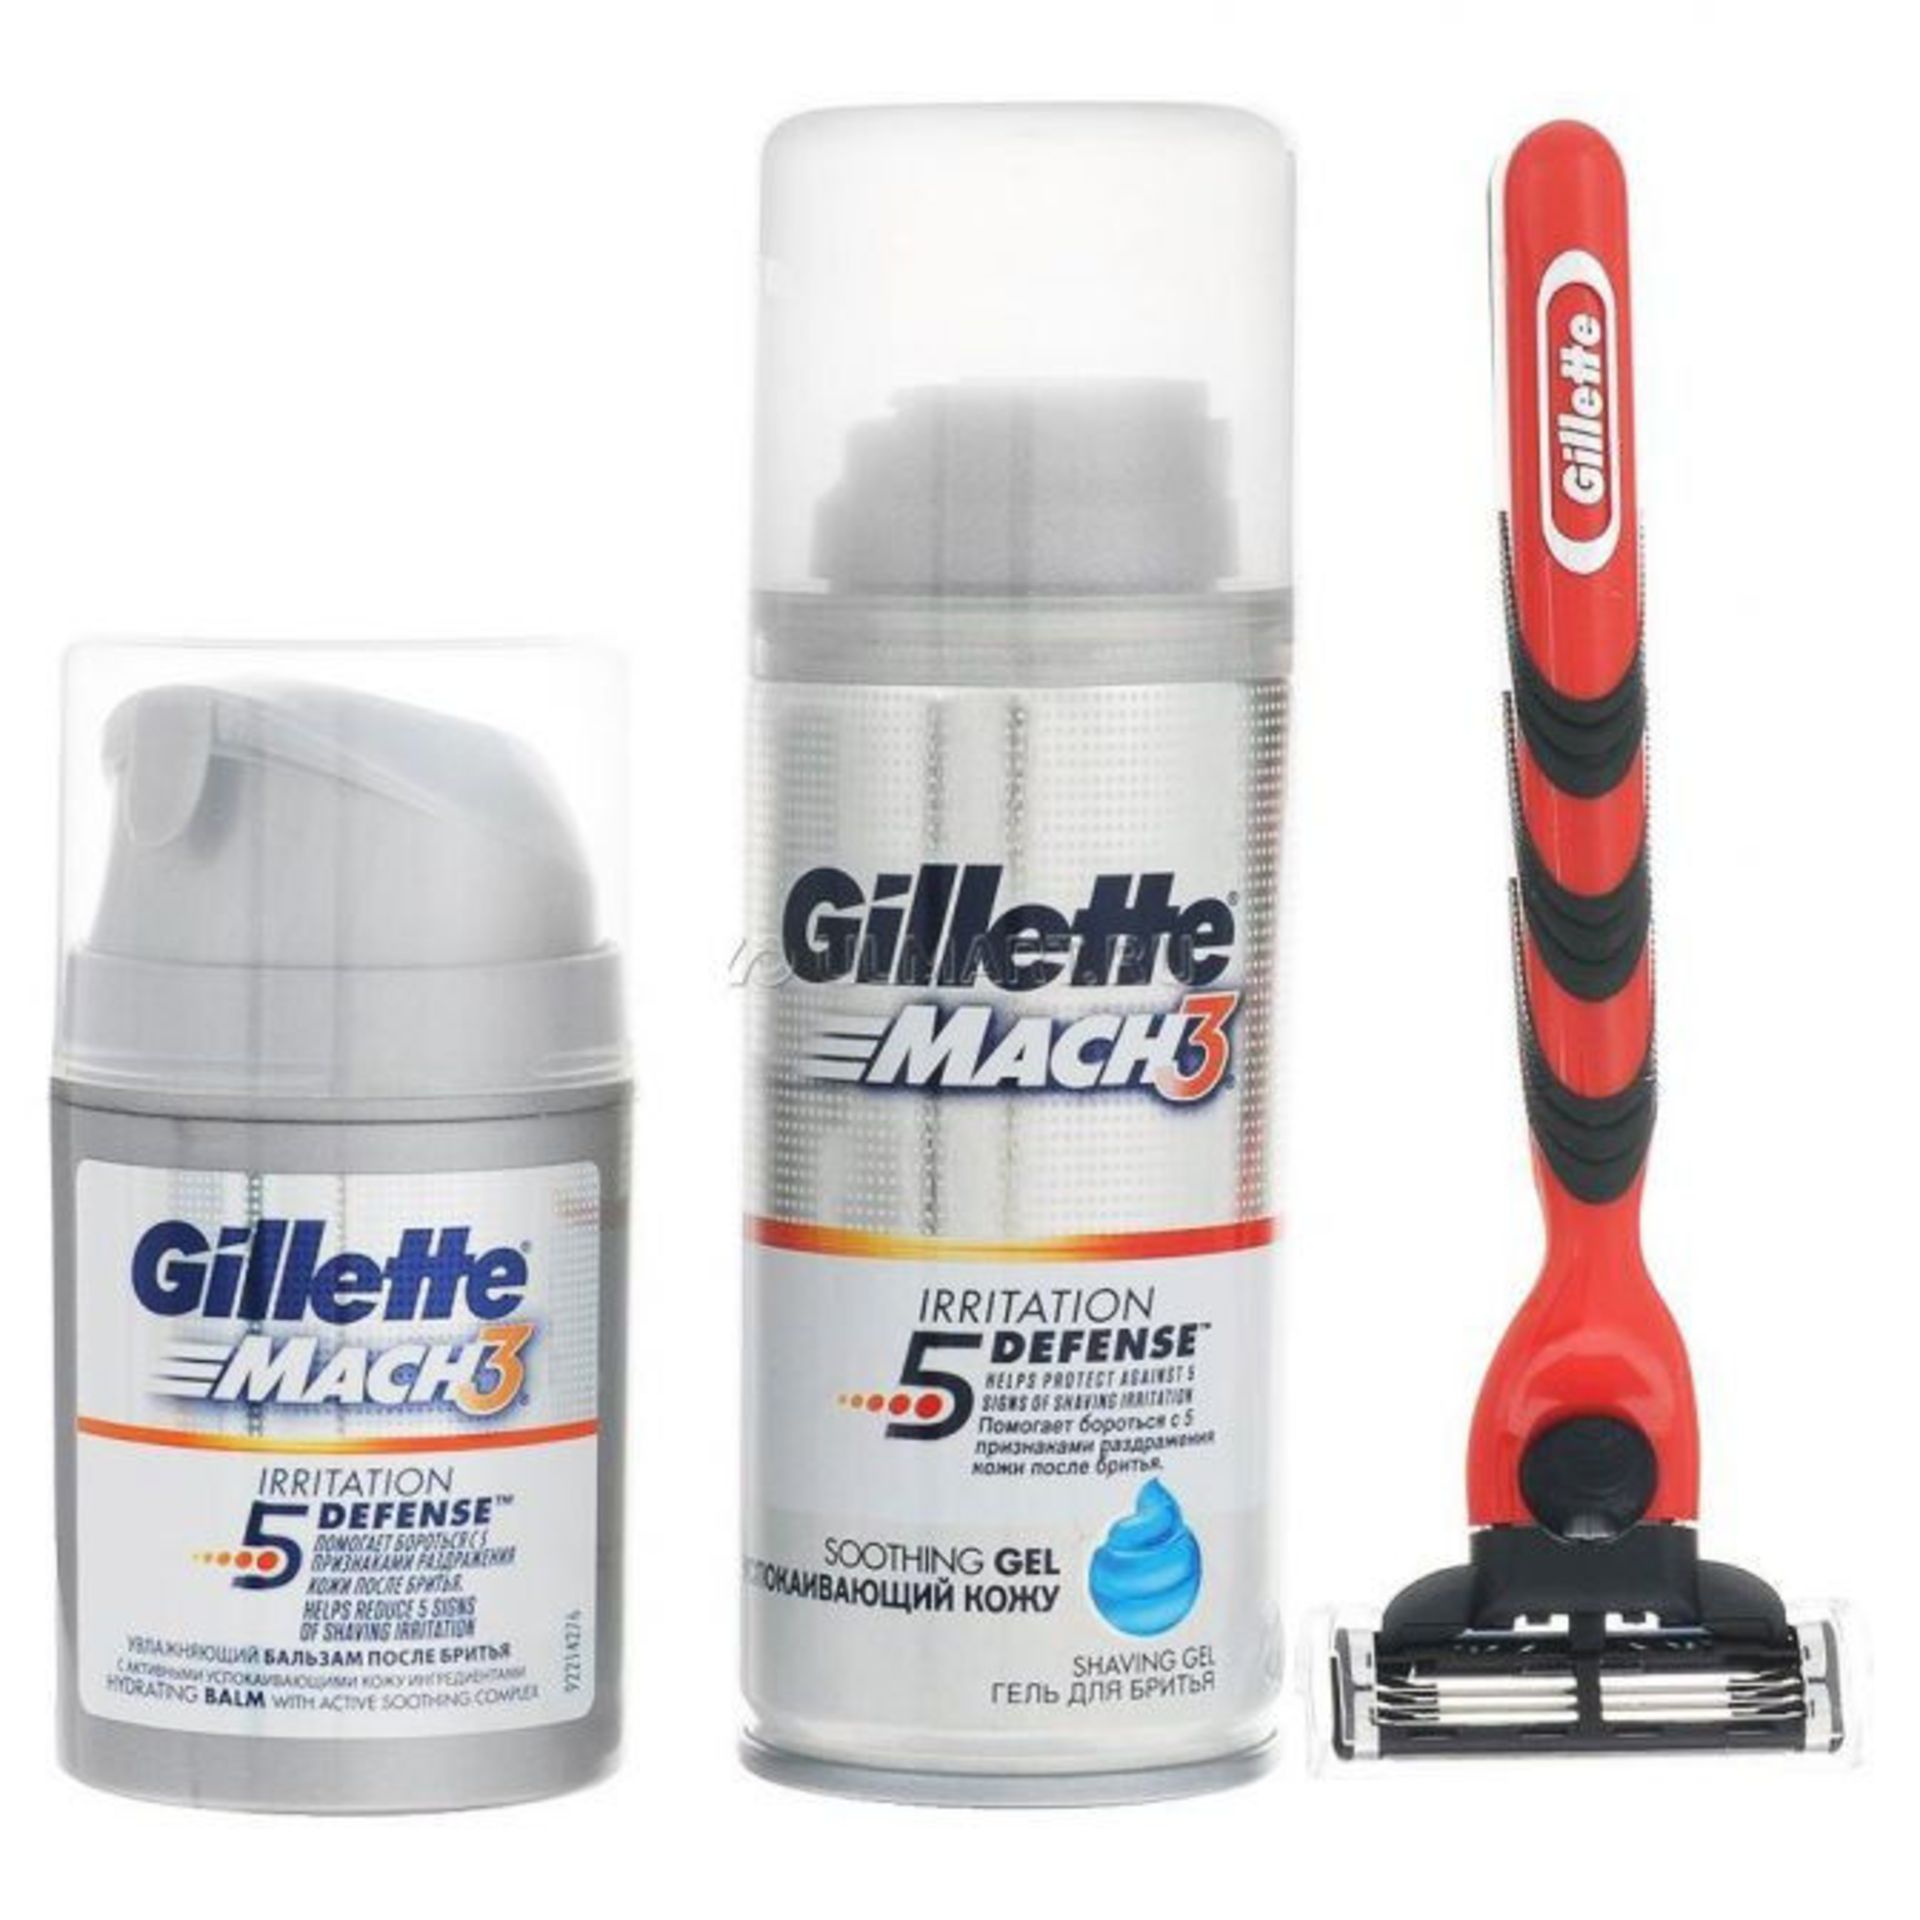 V Brand New Gillette Mach 3 Razor Set In Washbag X 2 YOUR BID PRICE TO BE MULTIPLIED BY TWO - Image 2 of 2